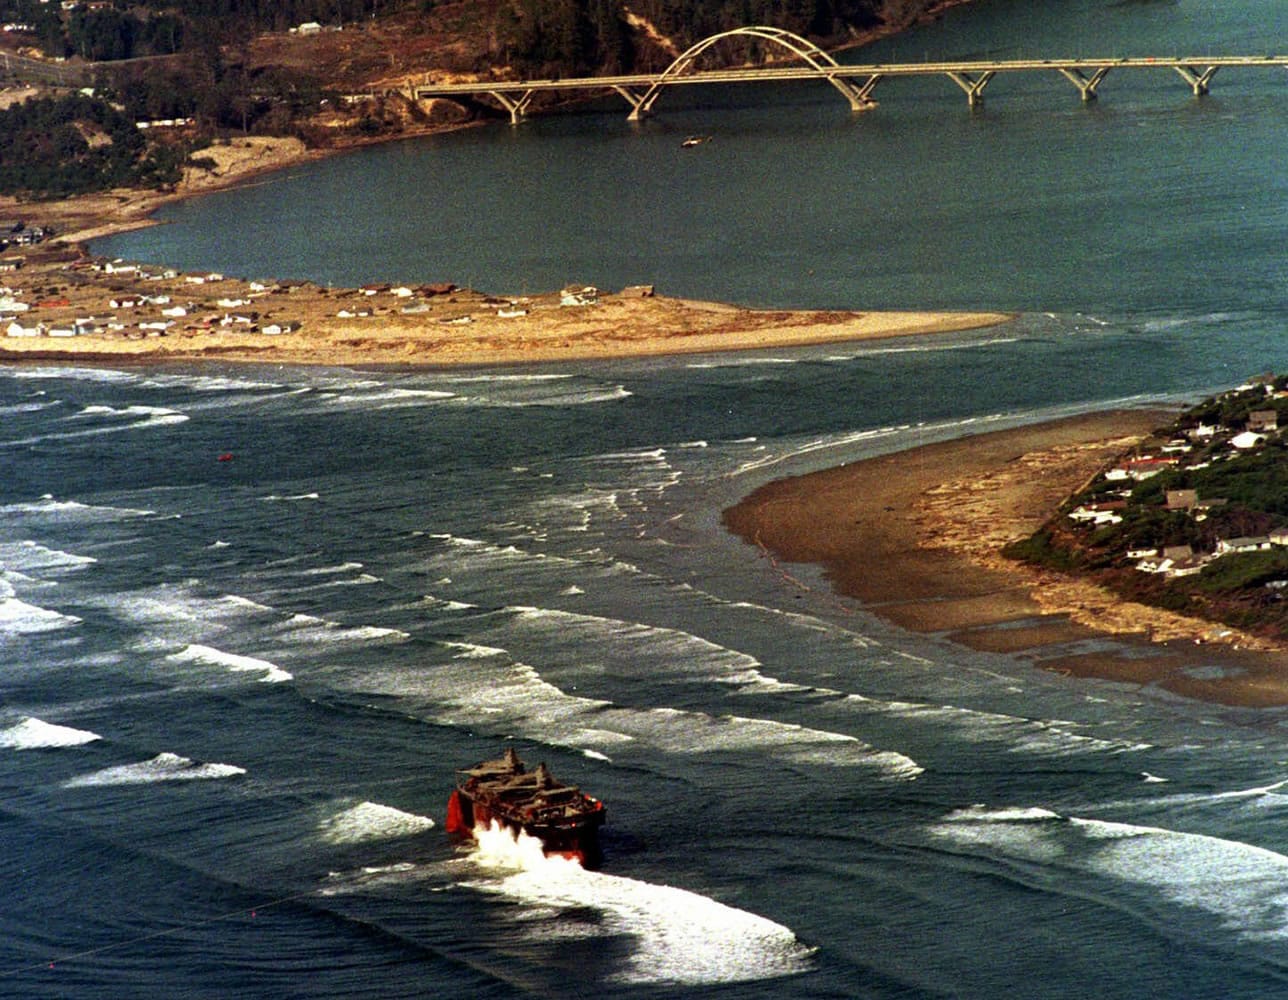 Photos by Don Ryan/Associated Press files
Waves crash against the broken New Carissa's bow near the entrance to Alsea Bay in Waldport, Ore., on March 6, 1999.